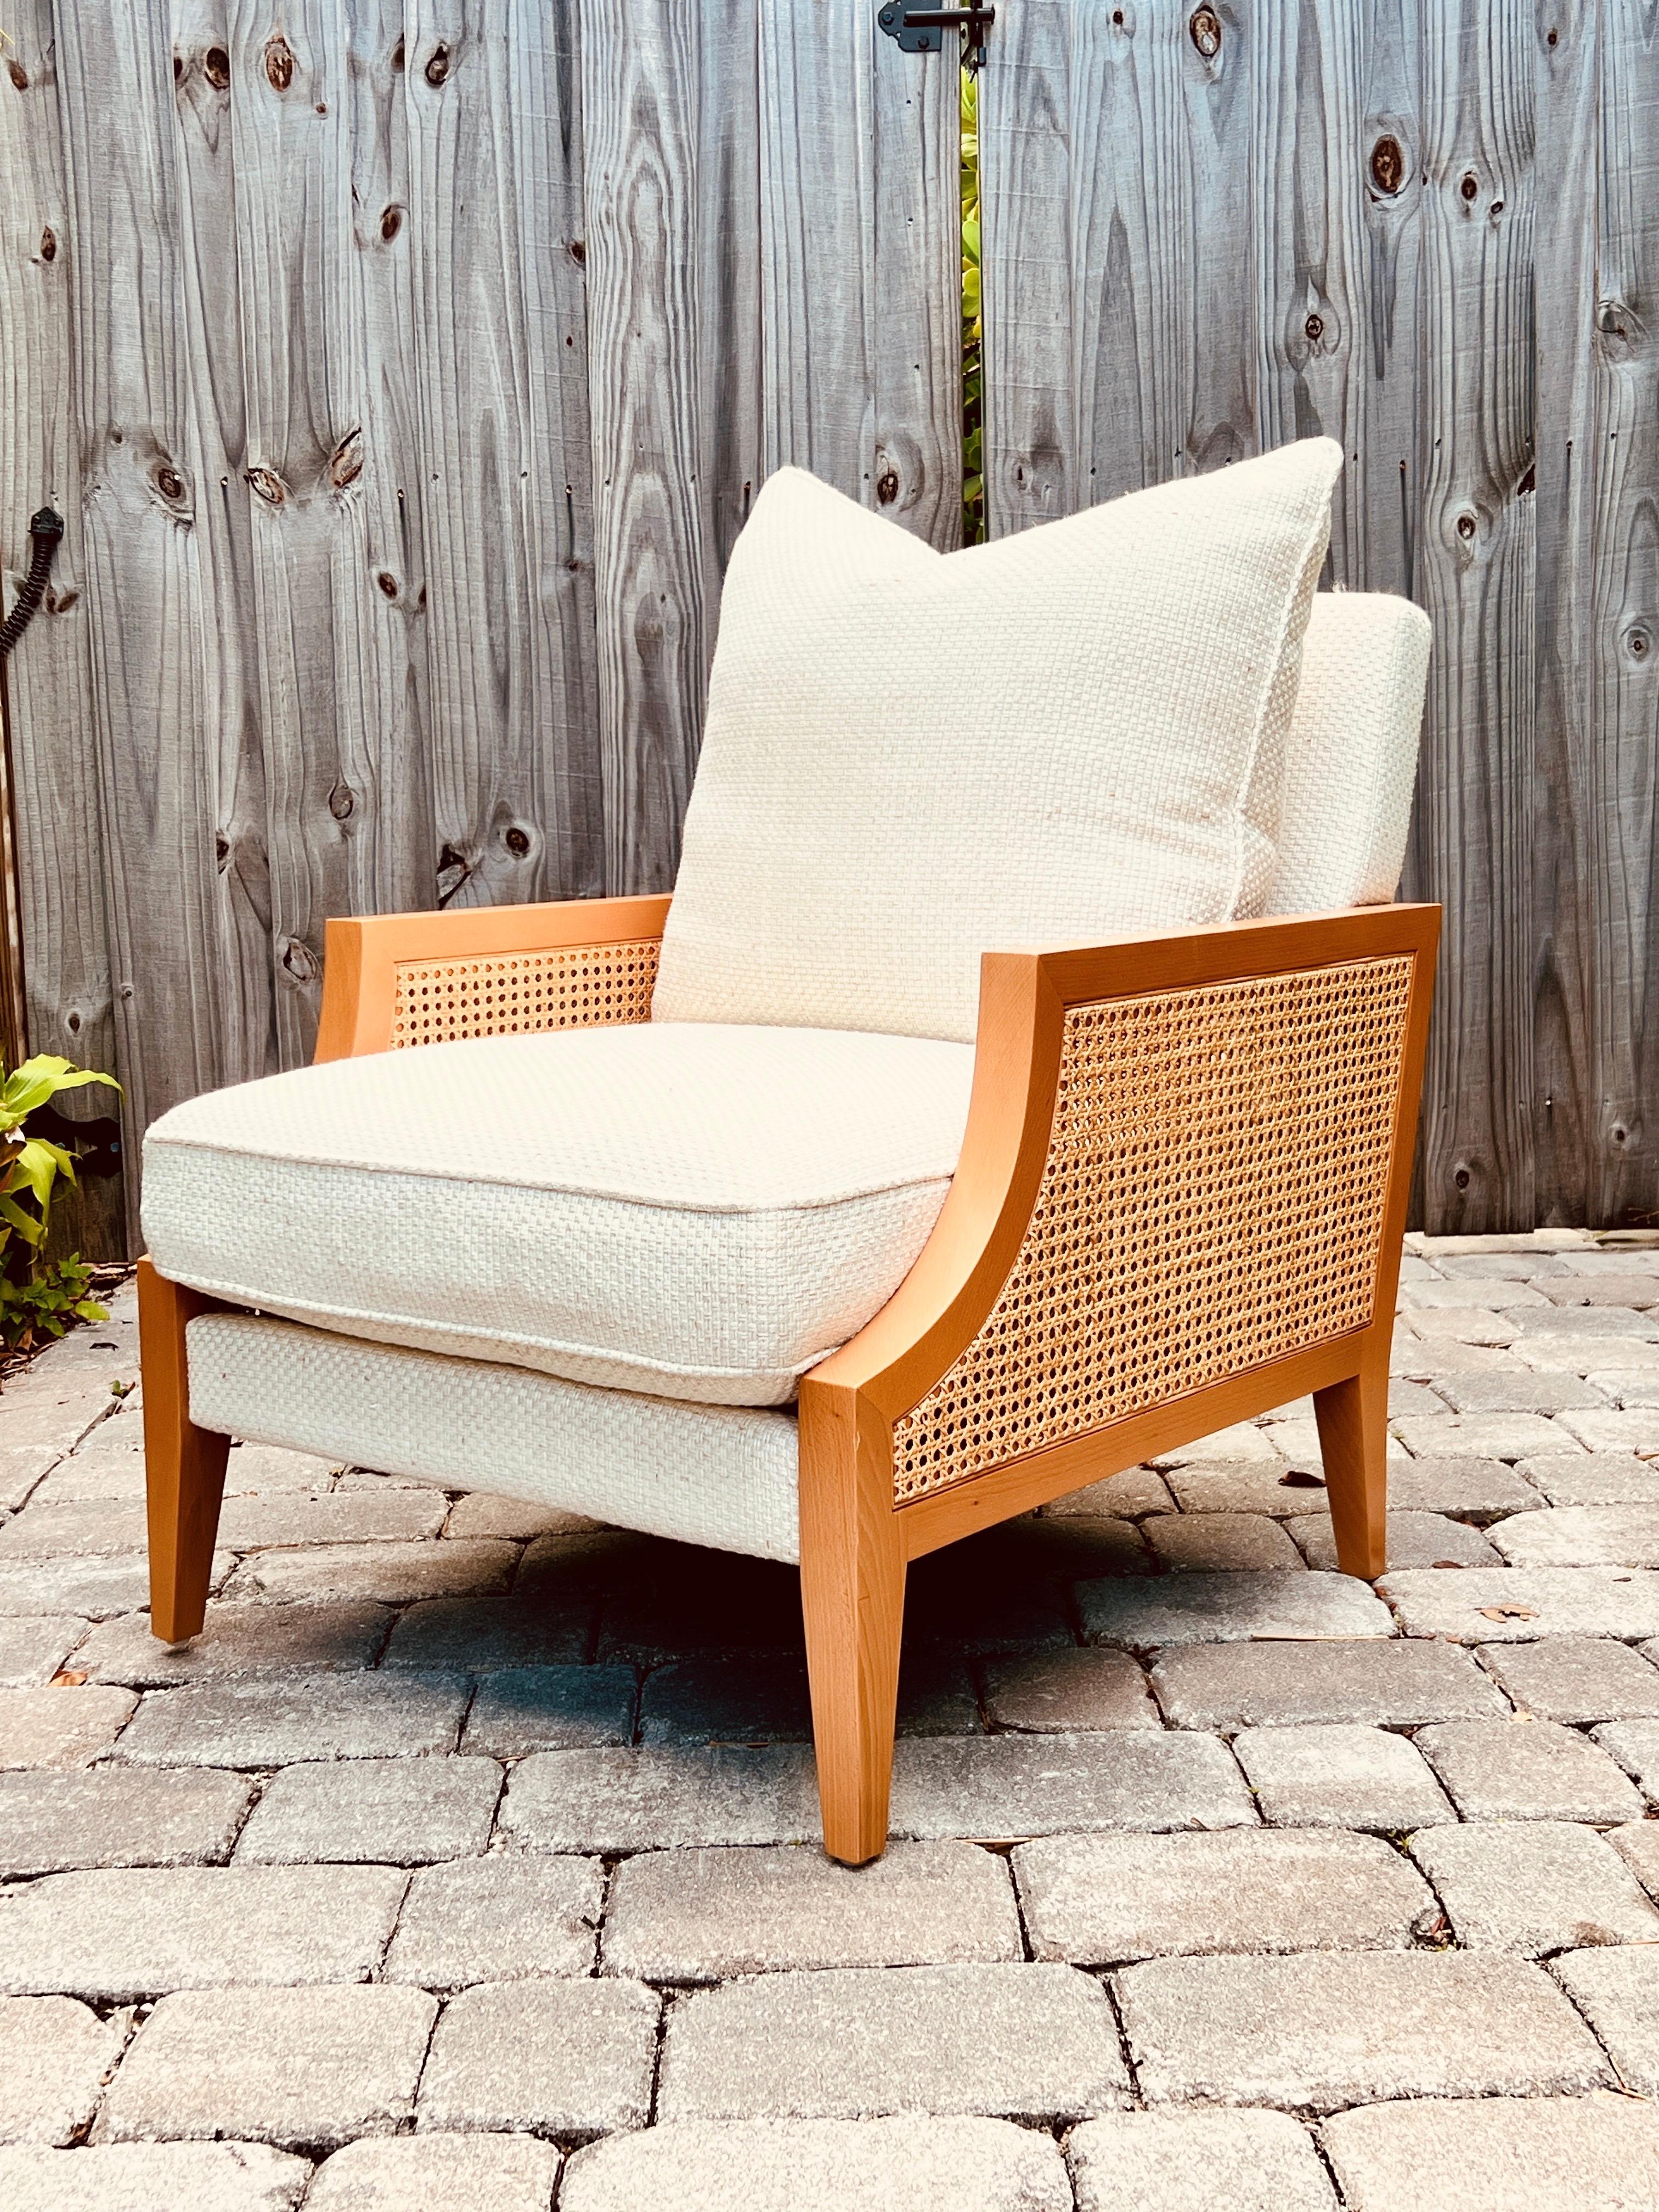 The Axel Armchair by La Maison Pierre Frey, features a sleek contemporary solid beech wood frame with cane sides in a natural tan finish. Newly upholstered in Pierre Frey fabric from the Hanoi Collection, which features a basketweave design in hues